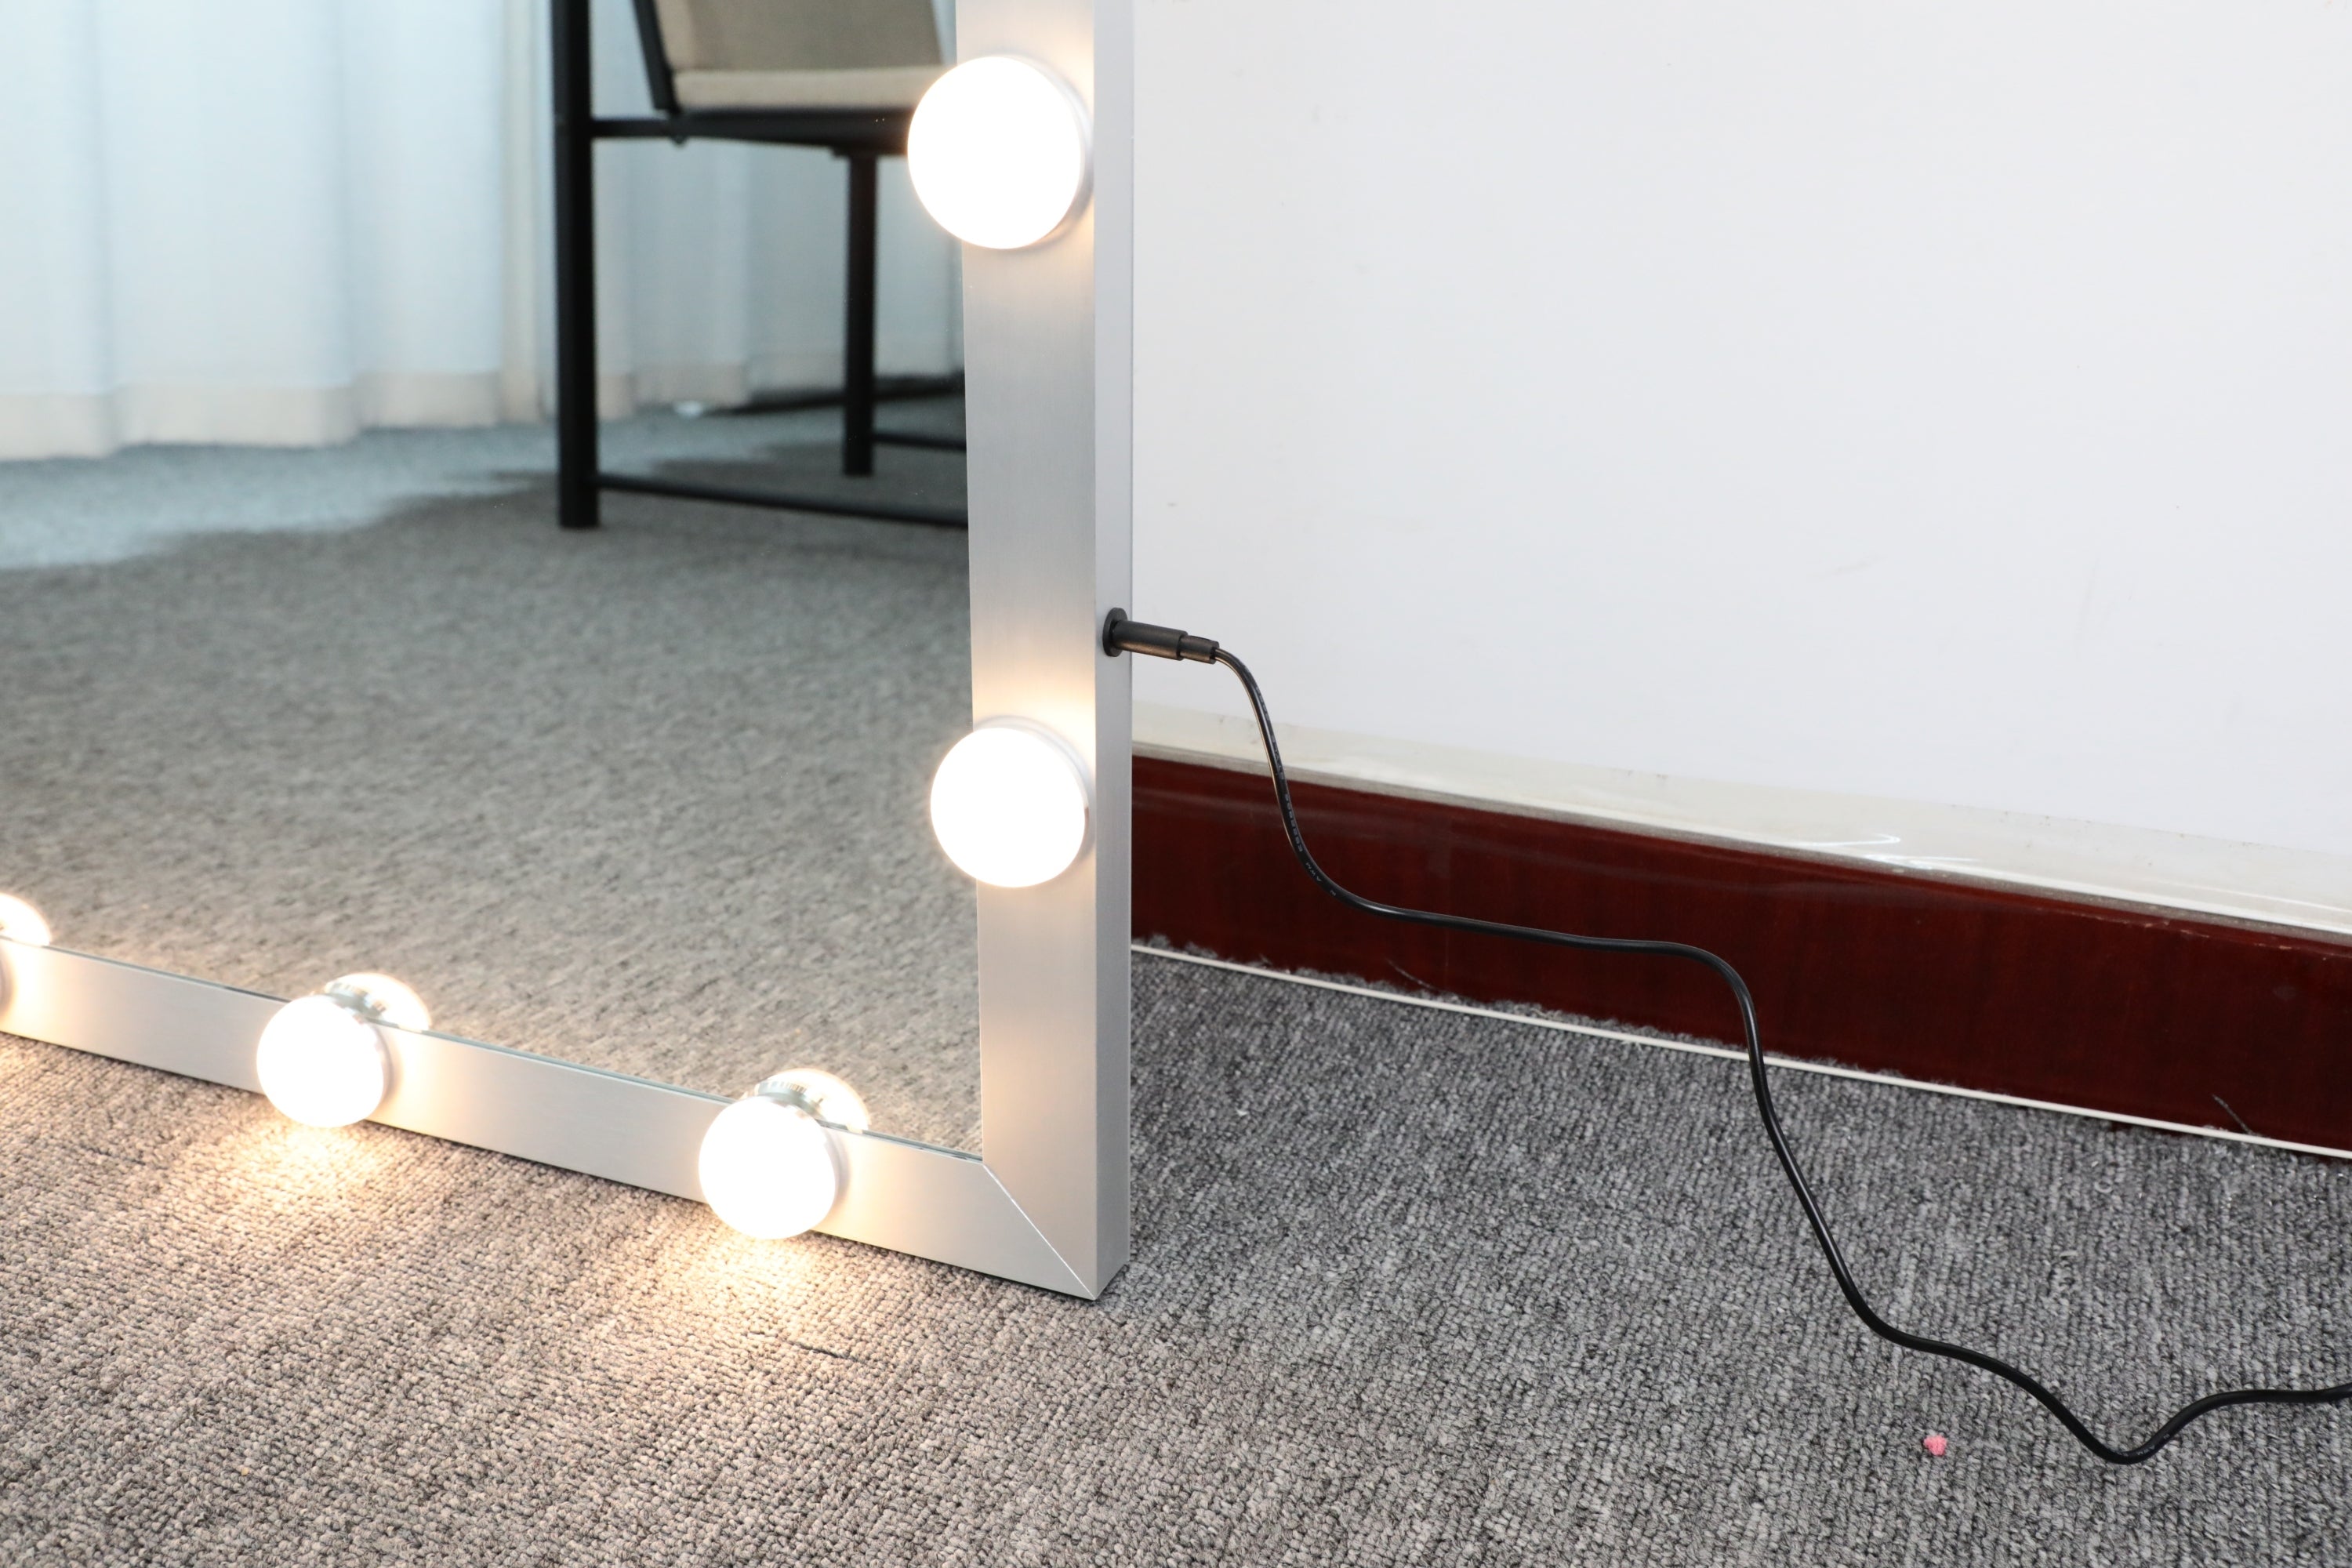 Whole Body Dressing Hollywood Vanity Mirror With 3 color Lights